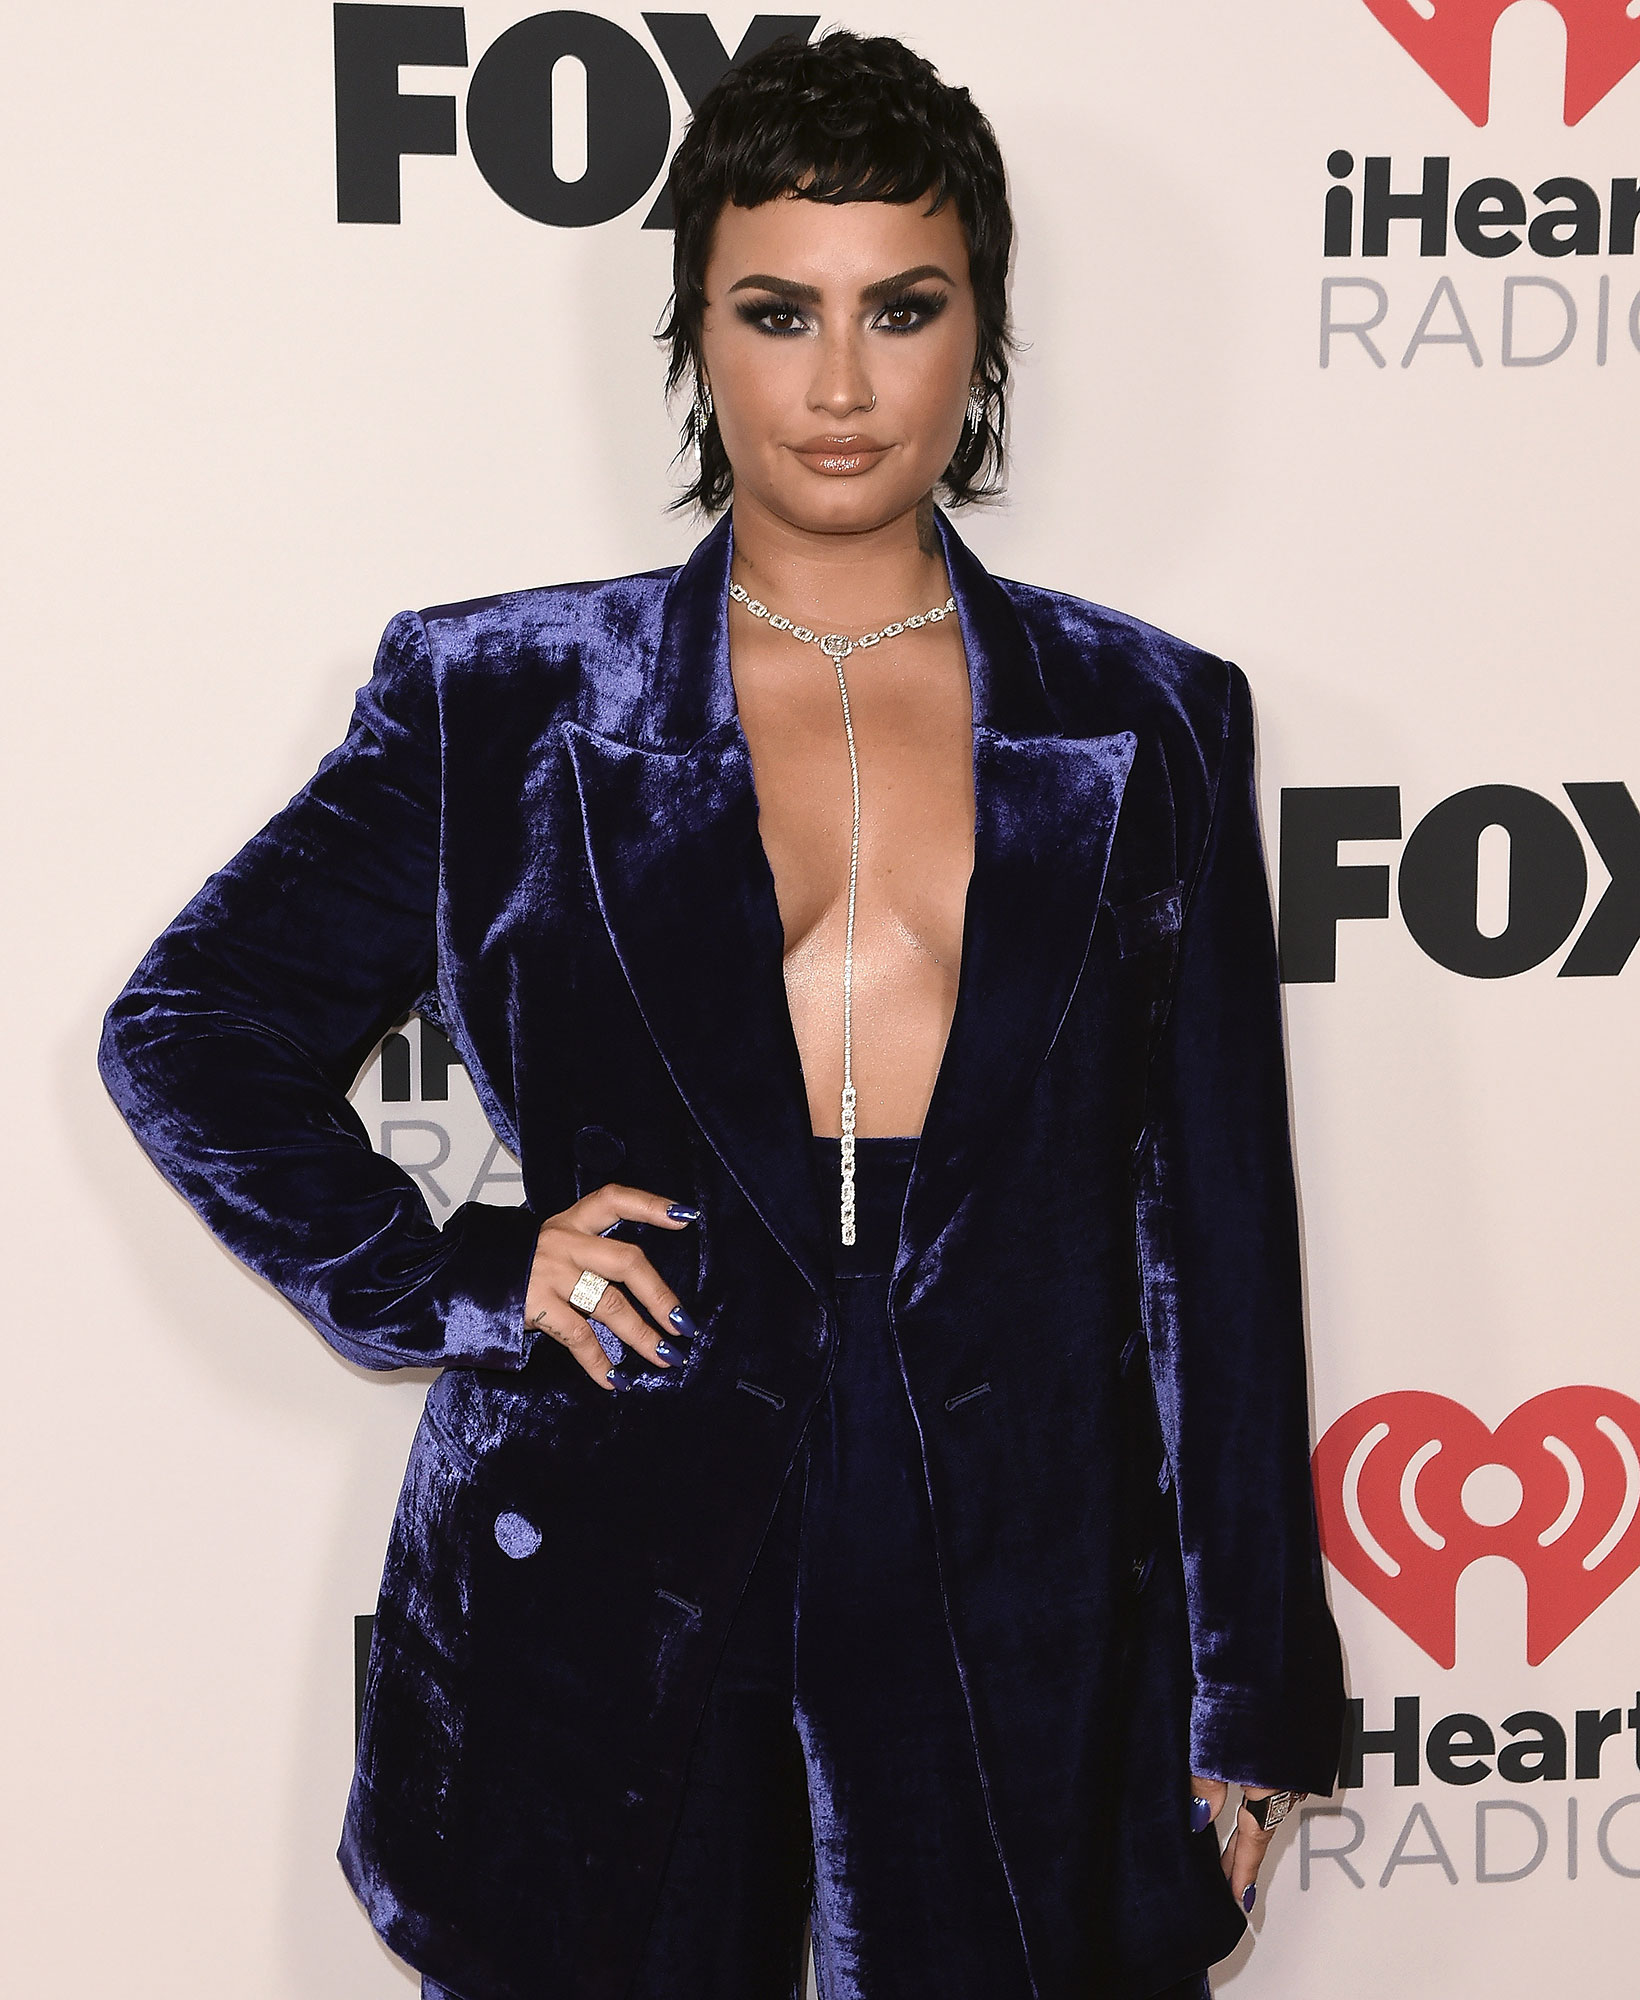 Why Demi Lovato Has Adopted the She/Her Pronouns Again